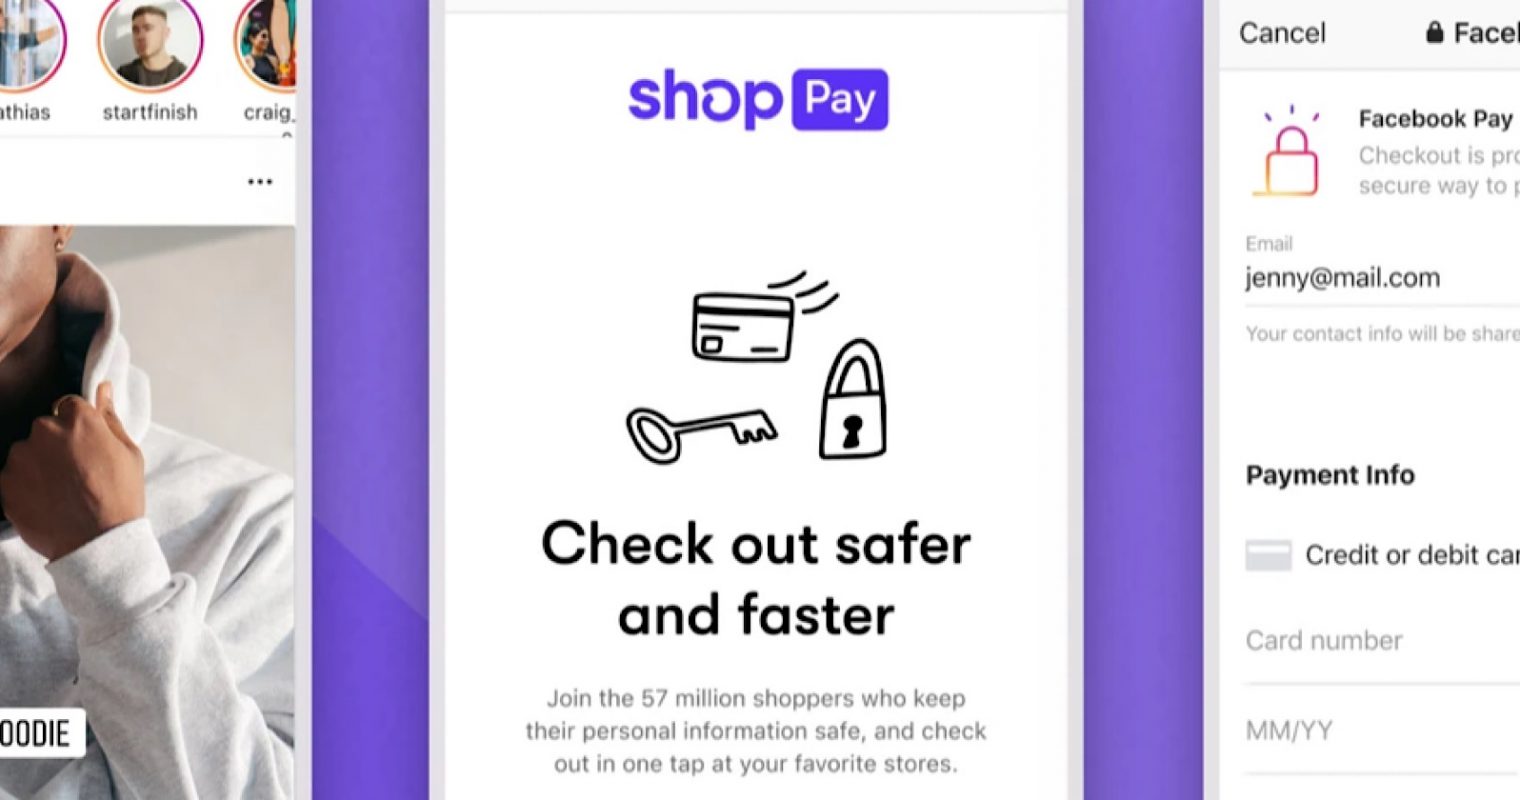 All Facebook and Google Merchants Can Accept Payment Via Shopify